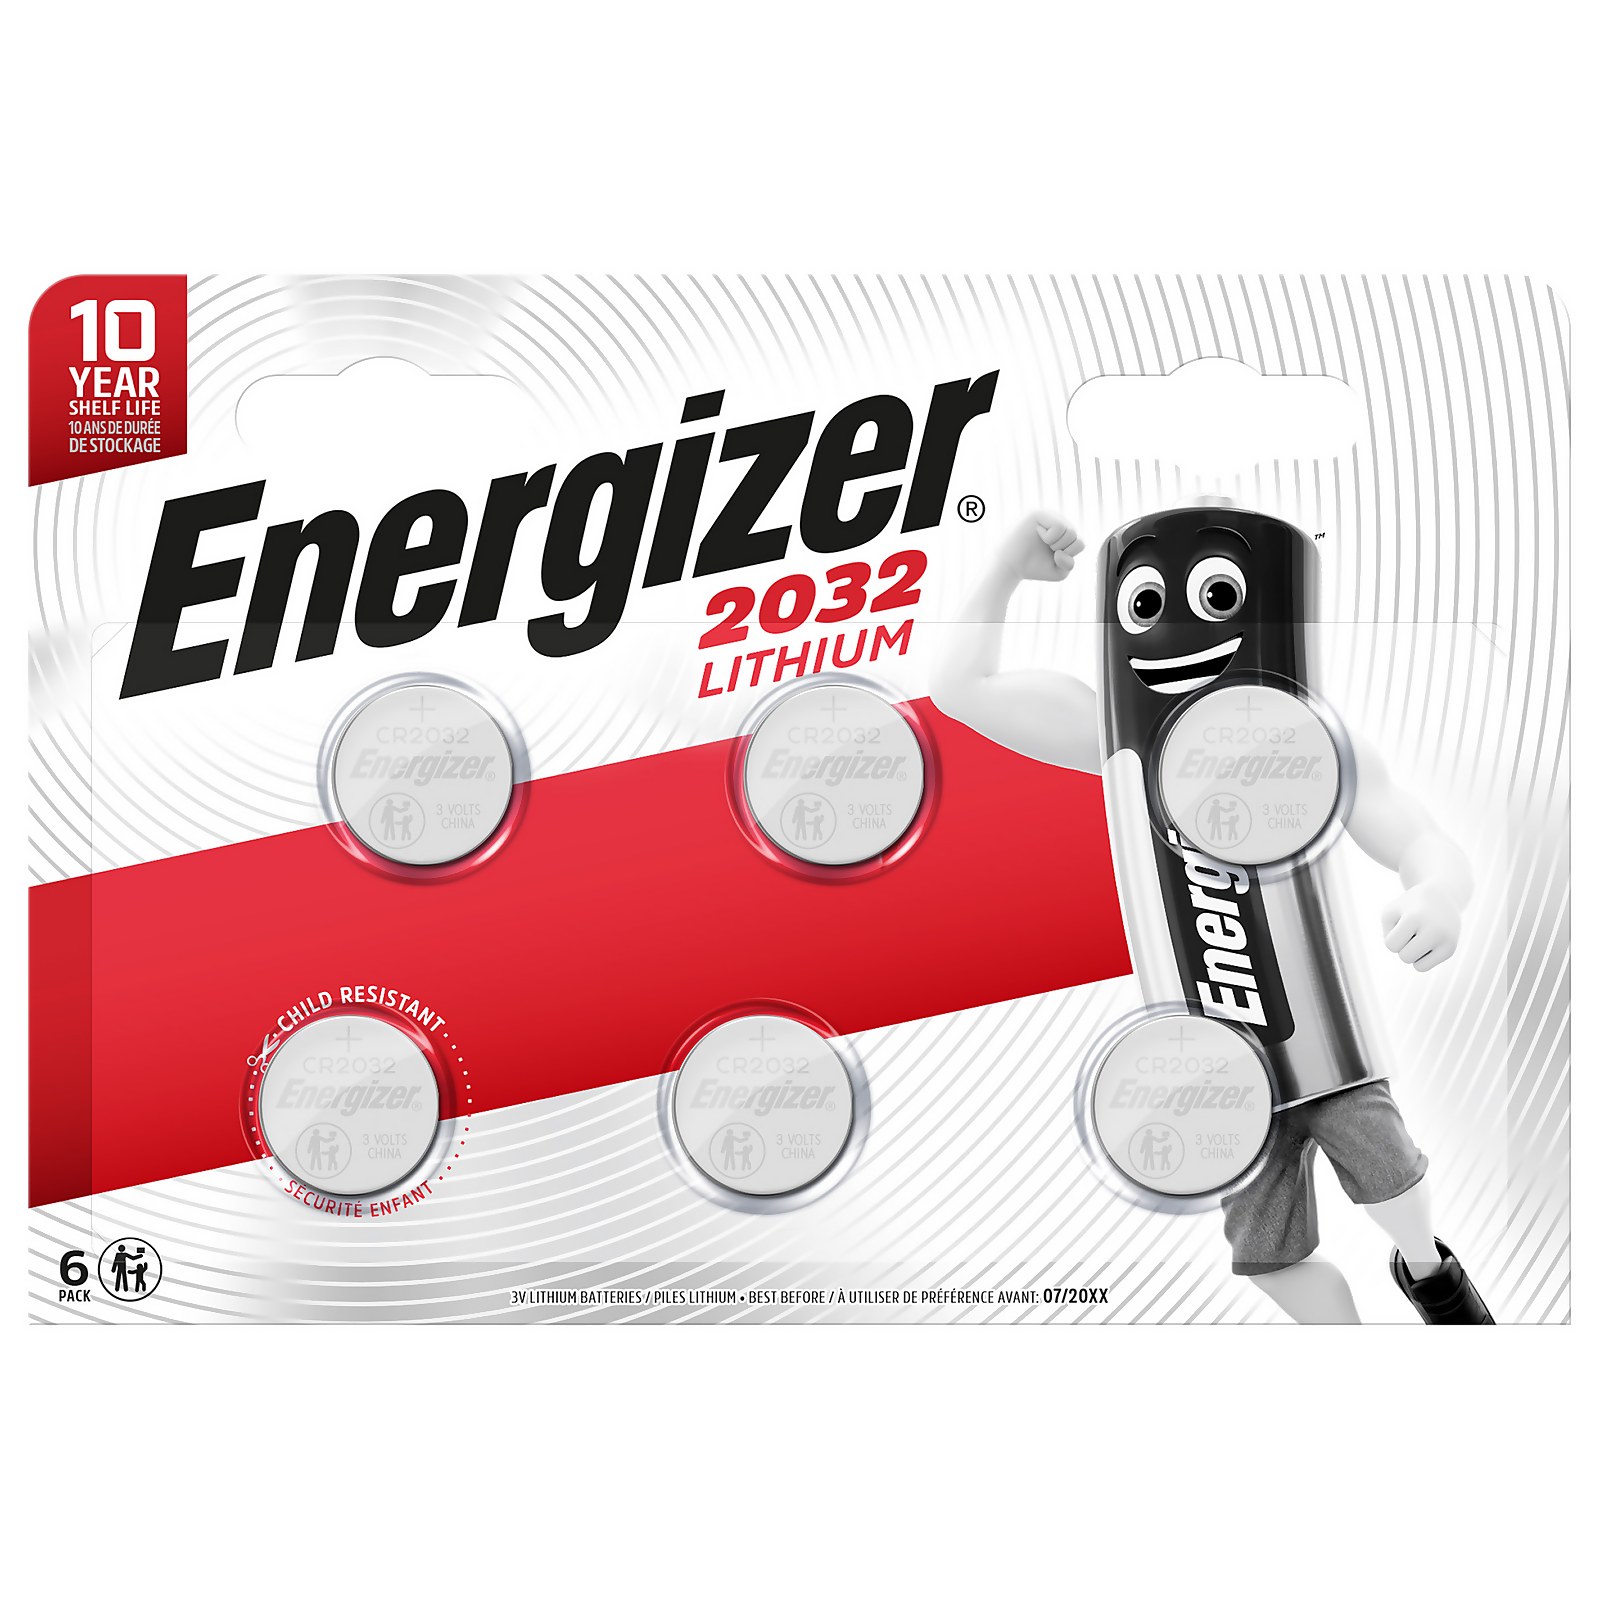 Photo of Energizer 2032 Lithium Coin Battery - 6 Pack